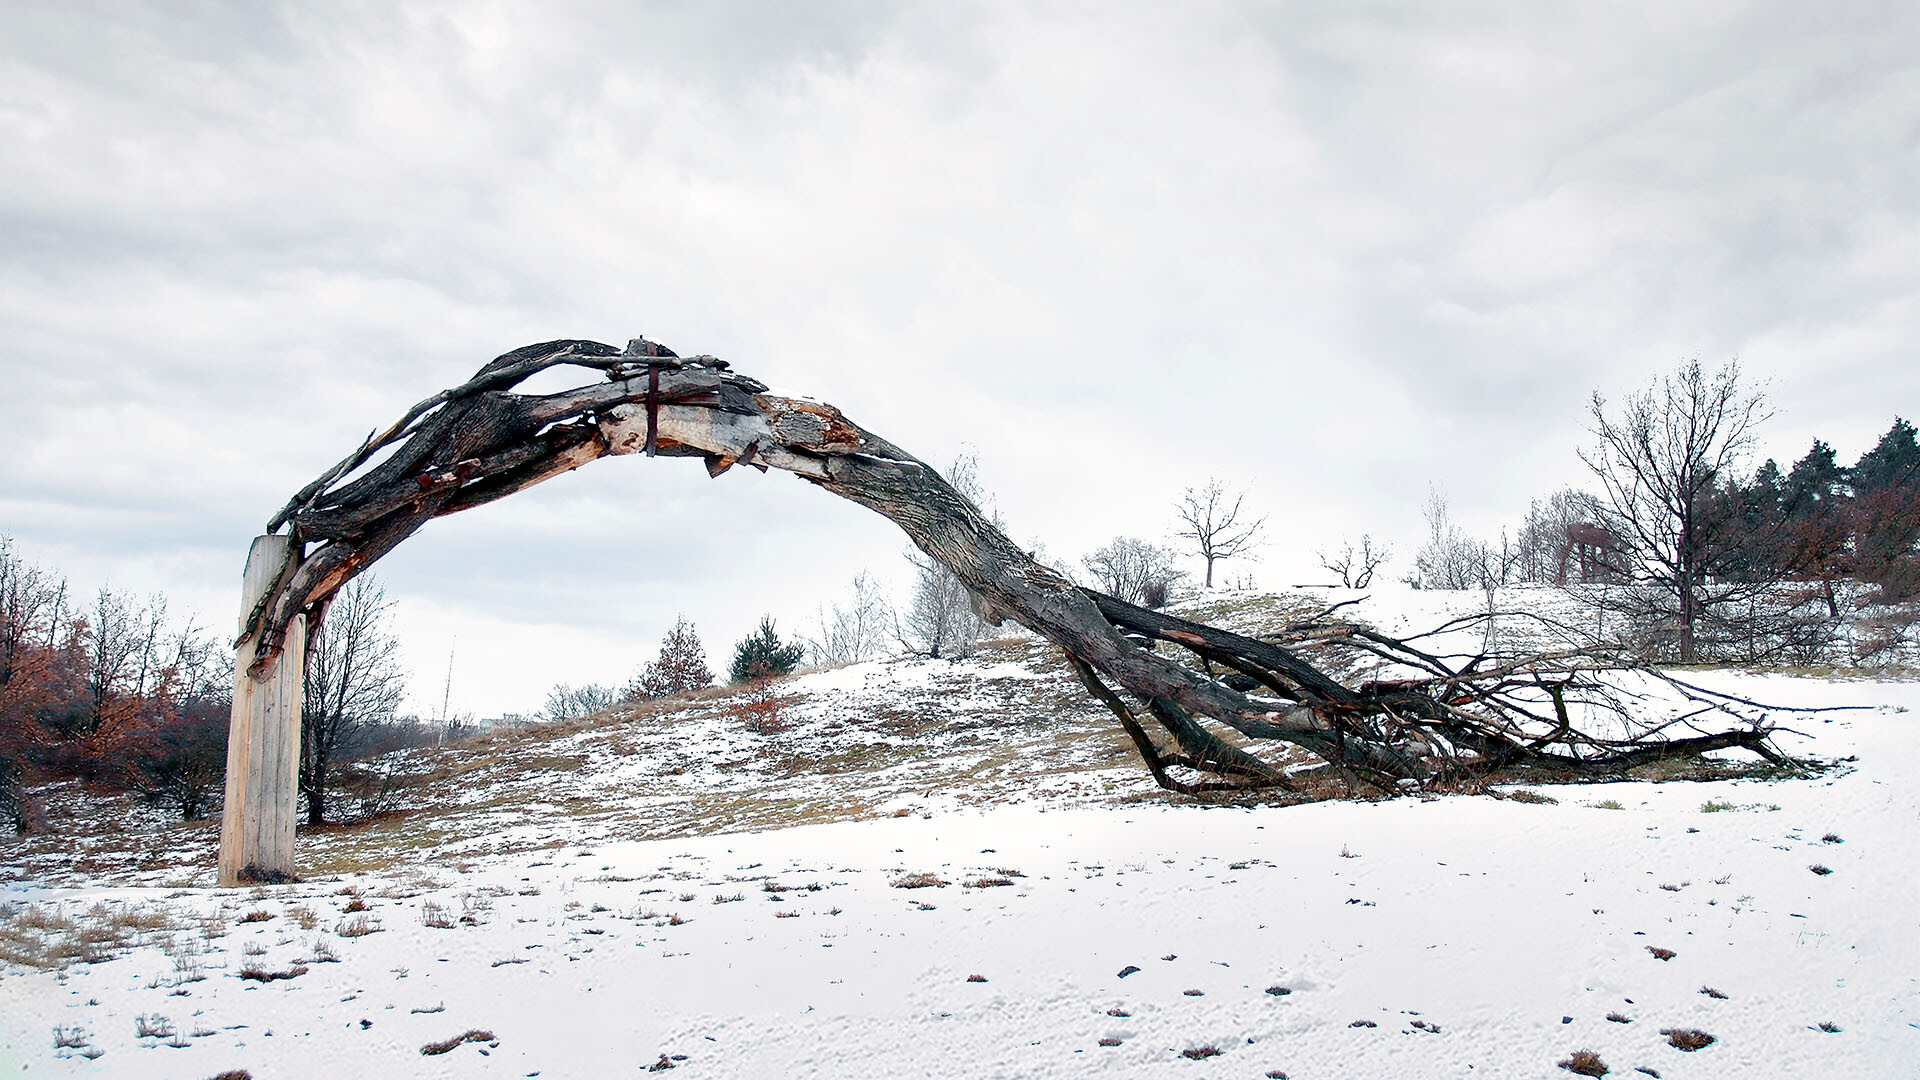 Monumental wooden site-specific sculpture: Withered tree amidst snowy slope. Artwork symbolizes human impact on nature's destruction.